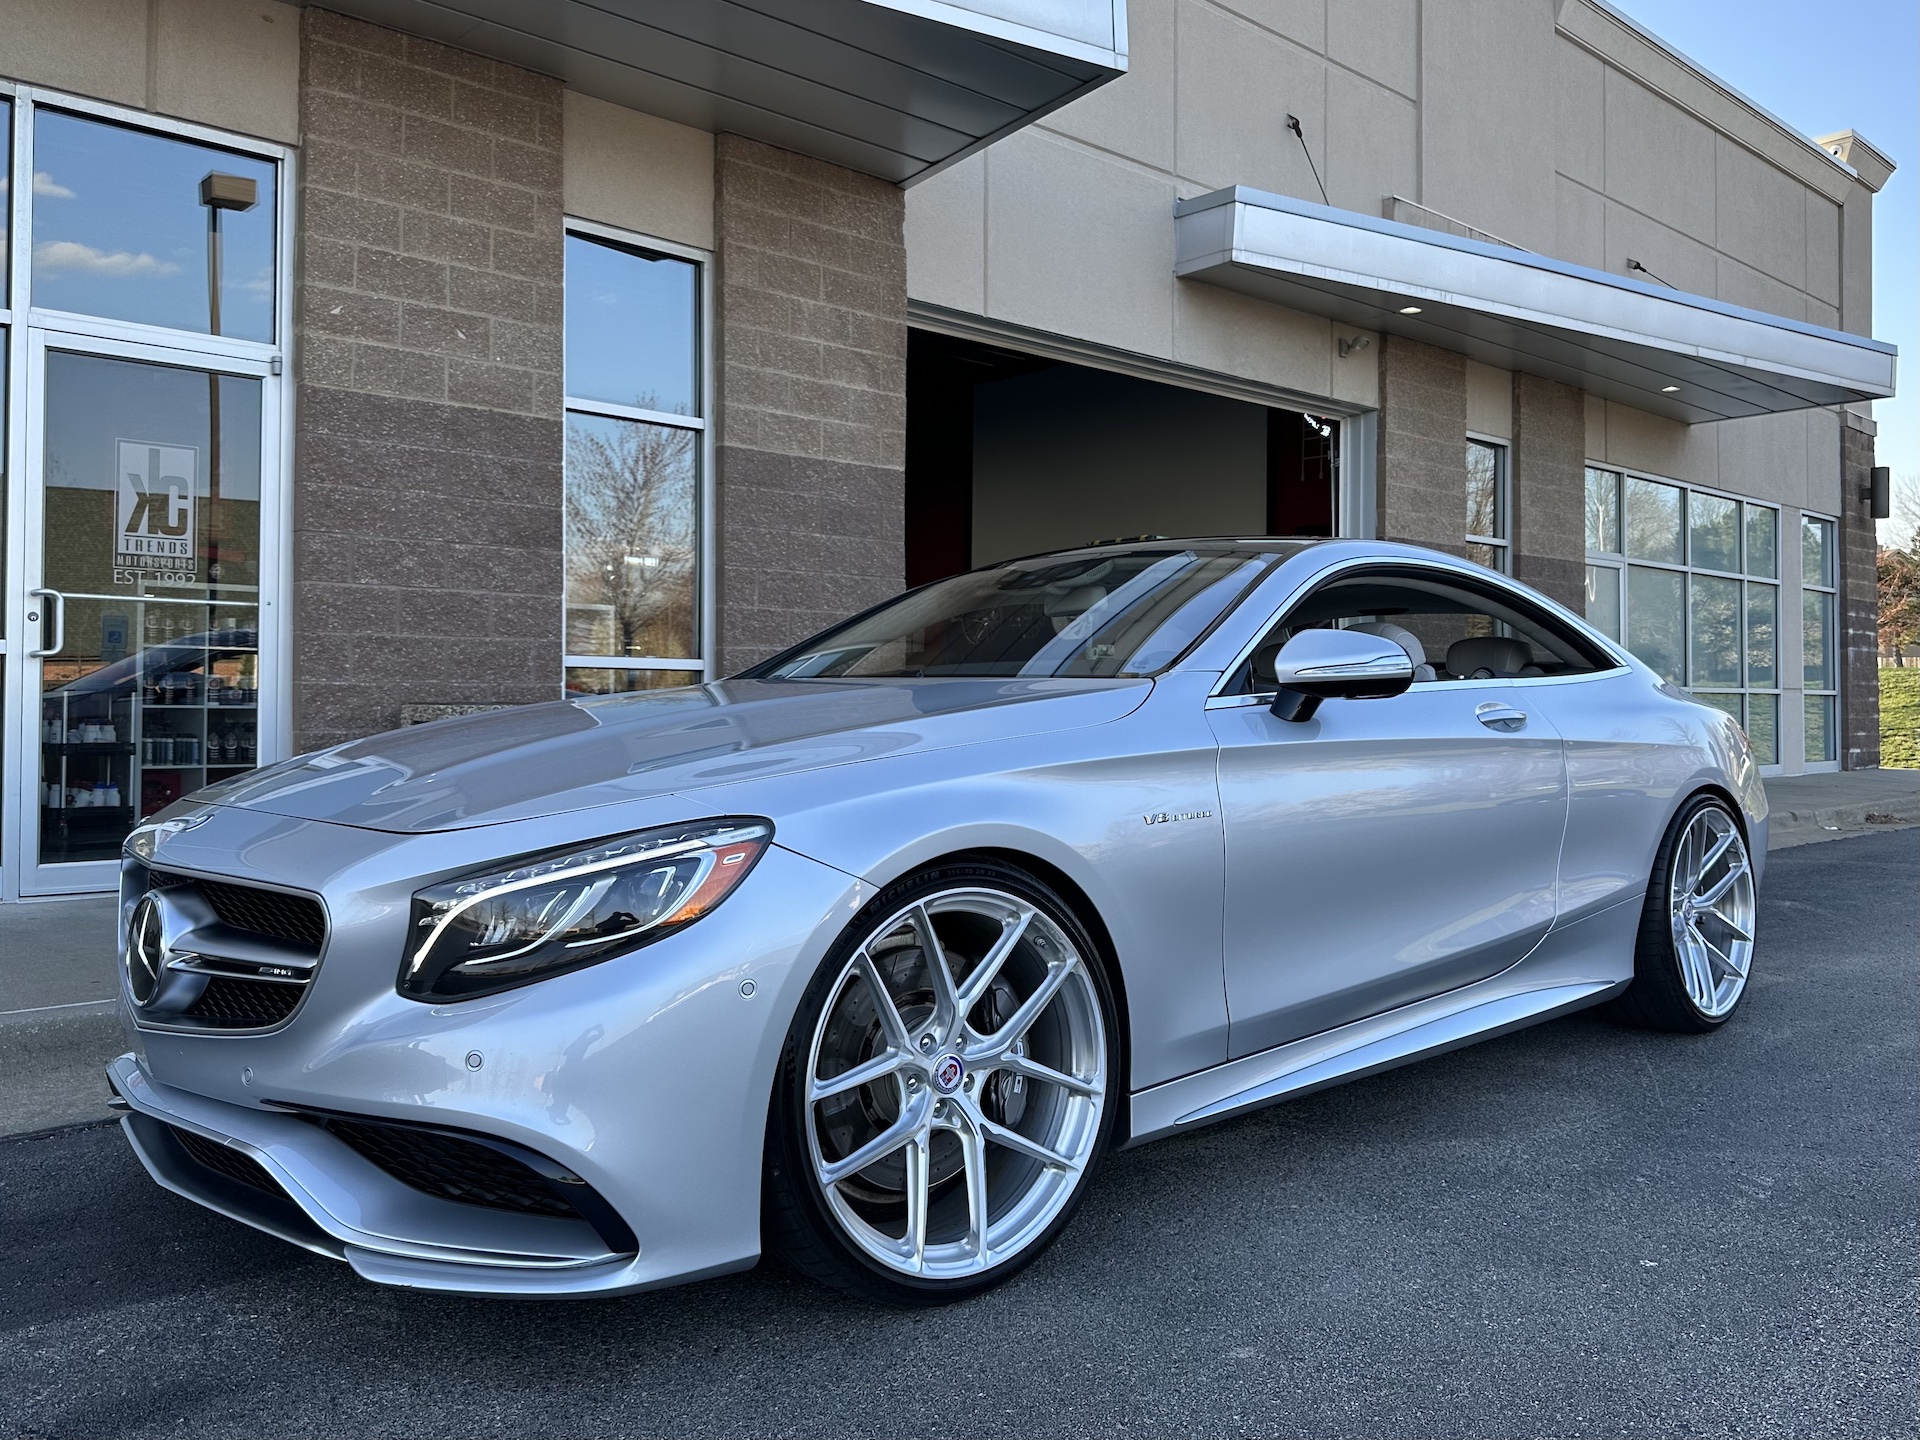  Mercedes-Benz S63 AMG with 